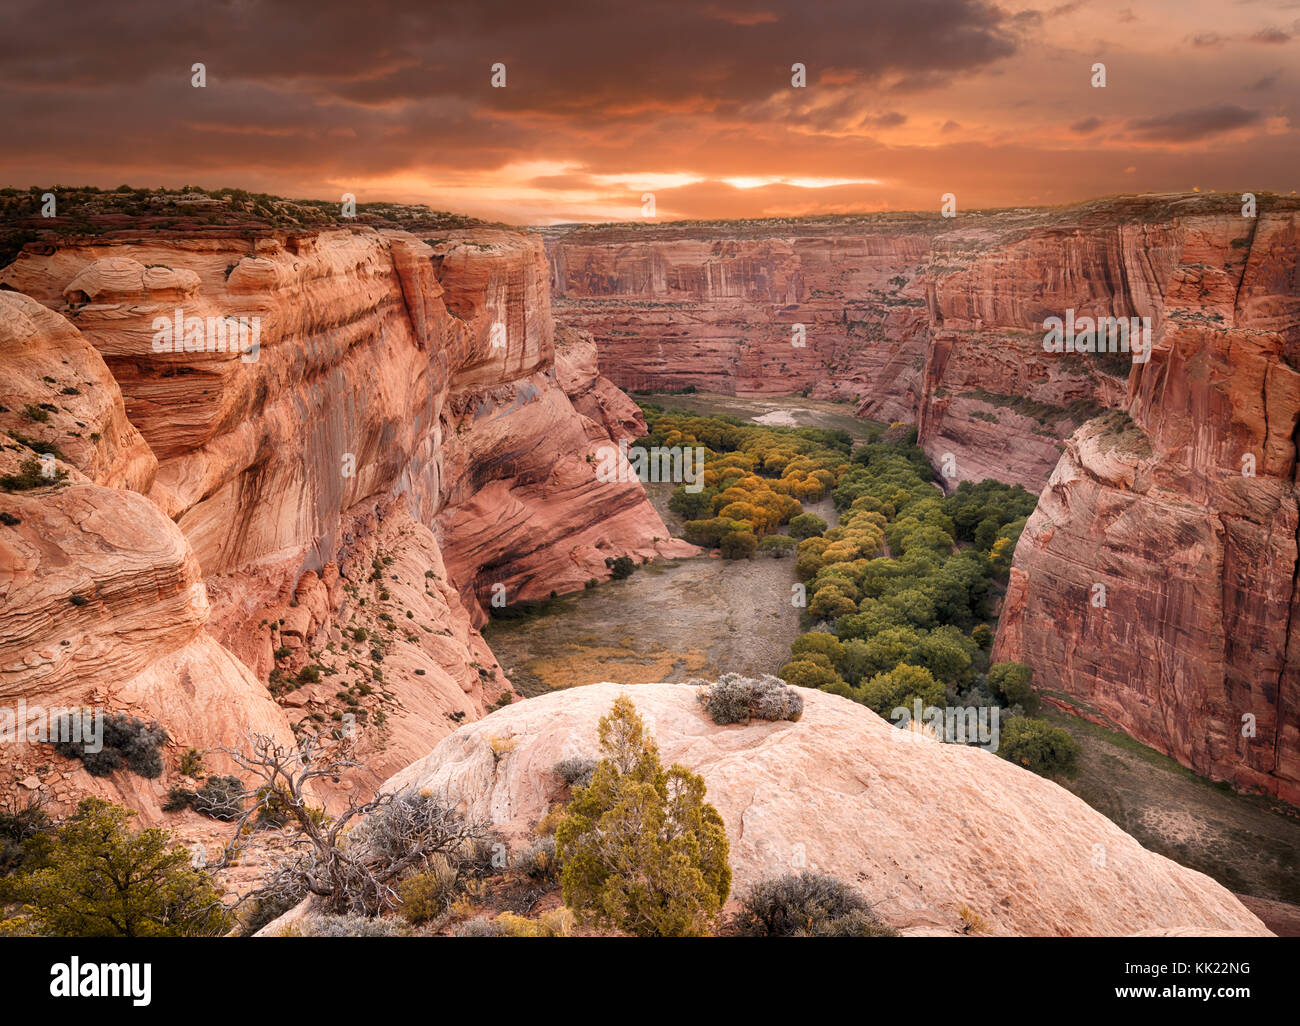 Canyon de Chelly (pronounced Canyon de 'Shay') National Monument is located in northern Arizona within the lands of the Navajo Nation. Stock Photo